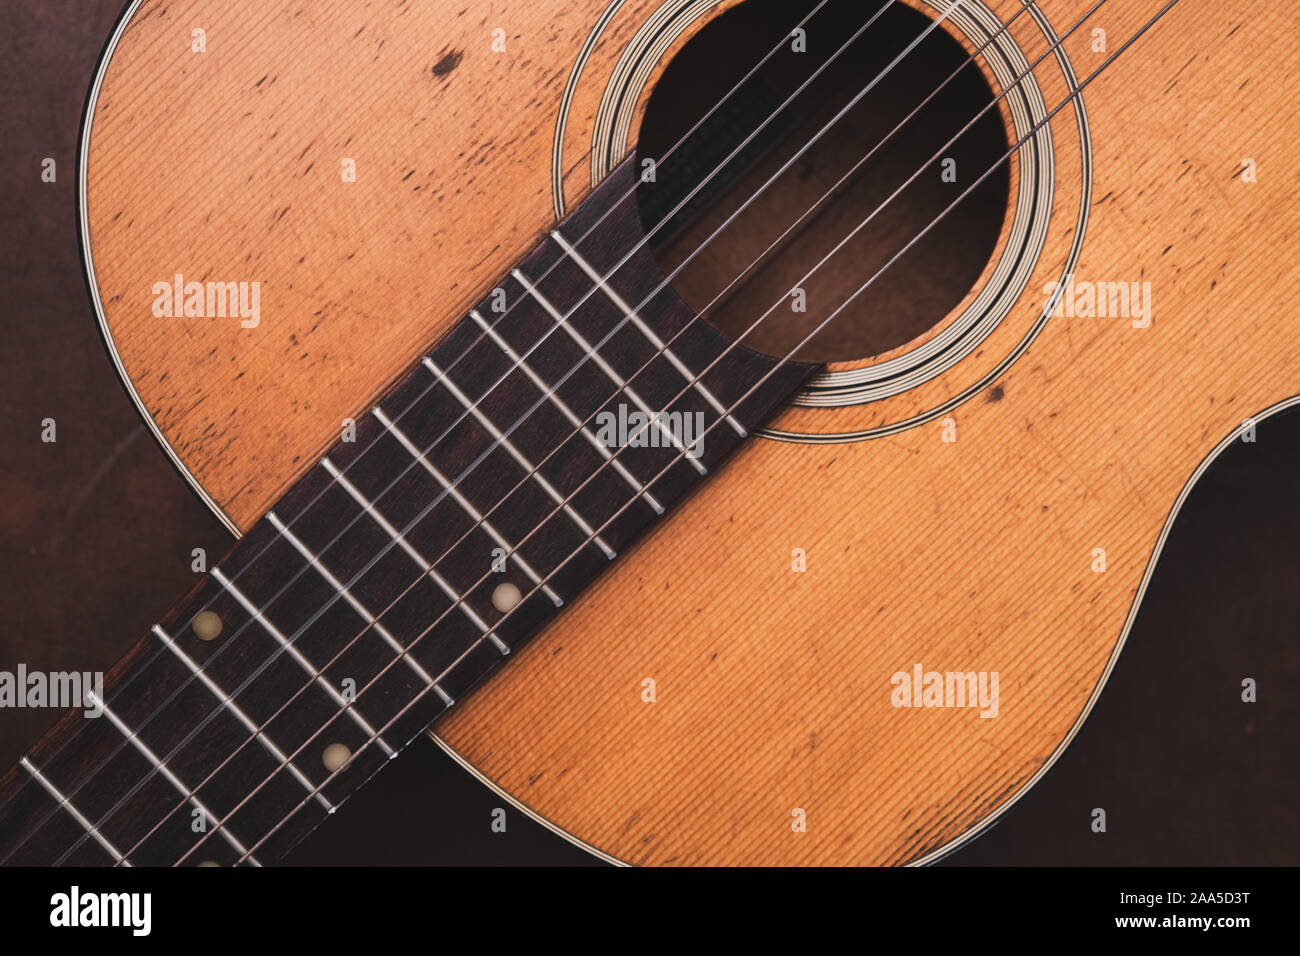 High angle view vintage old fashioned acoustic guitar body wooden neck and soundboard Stock Photo